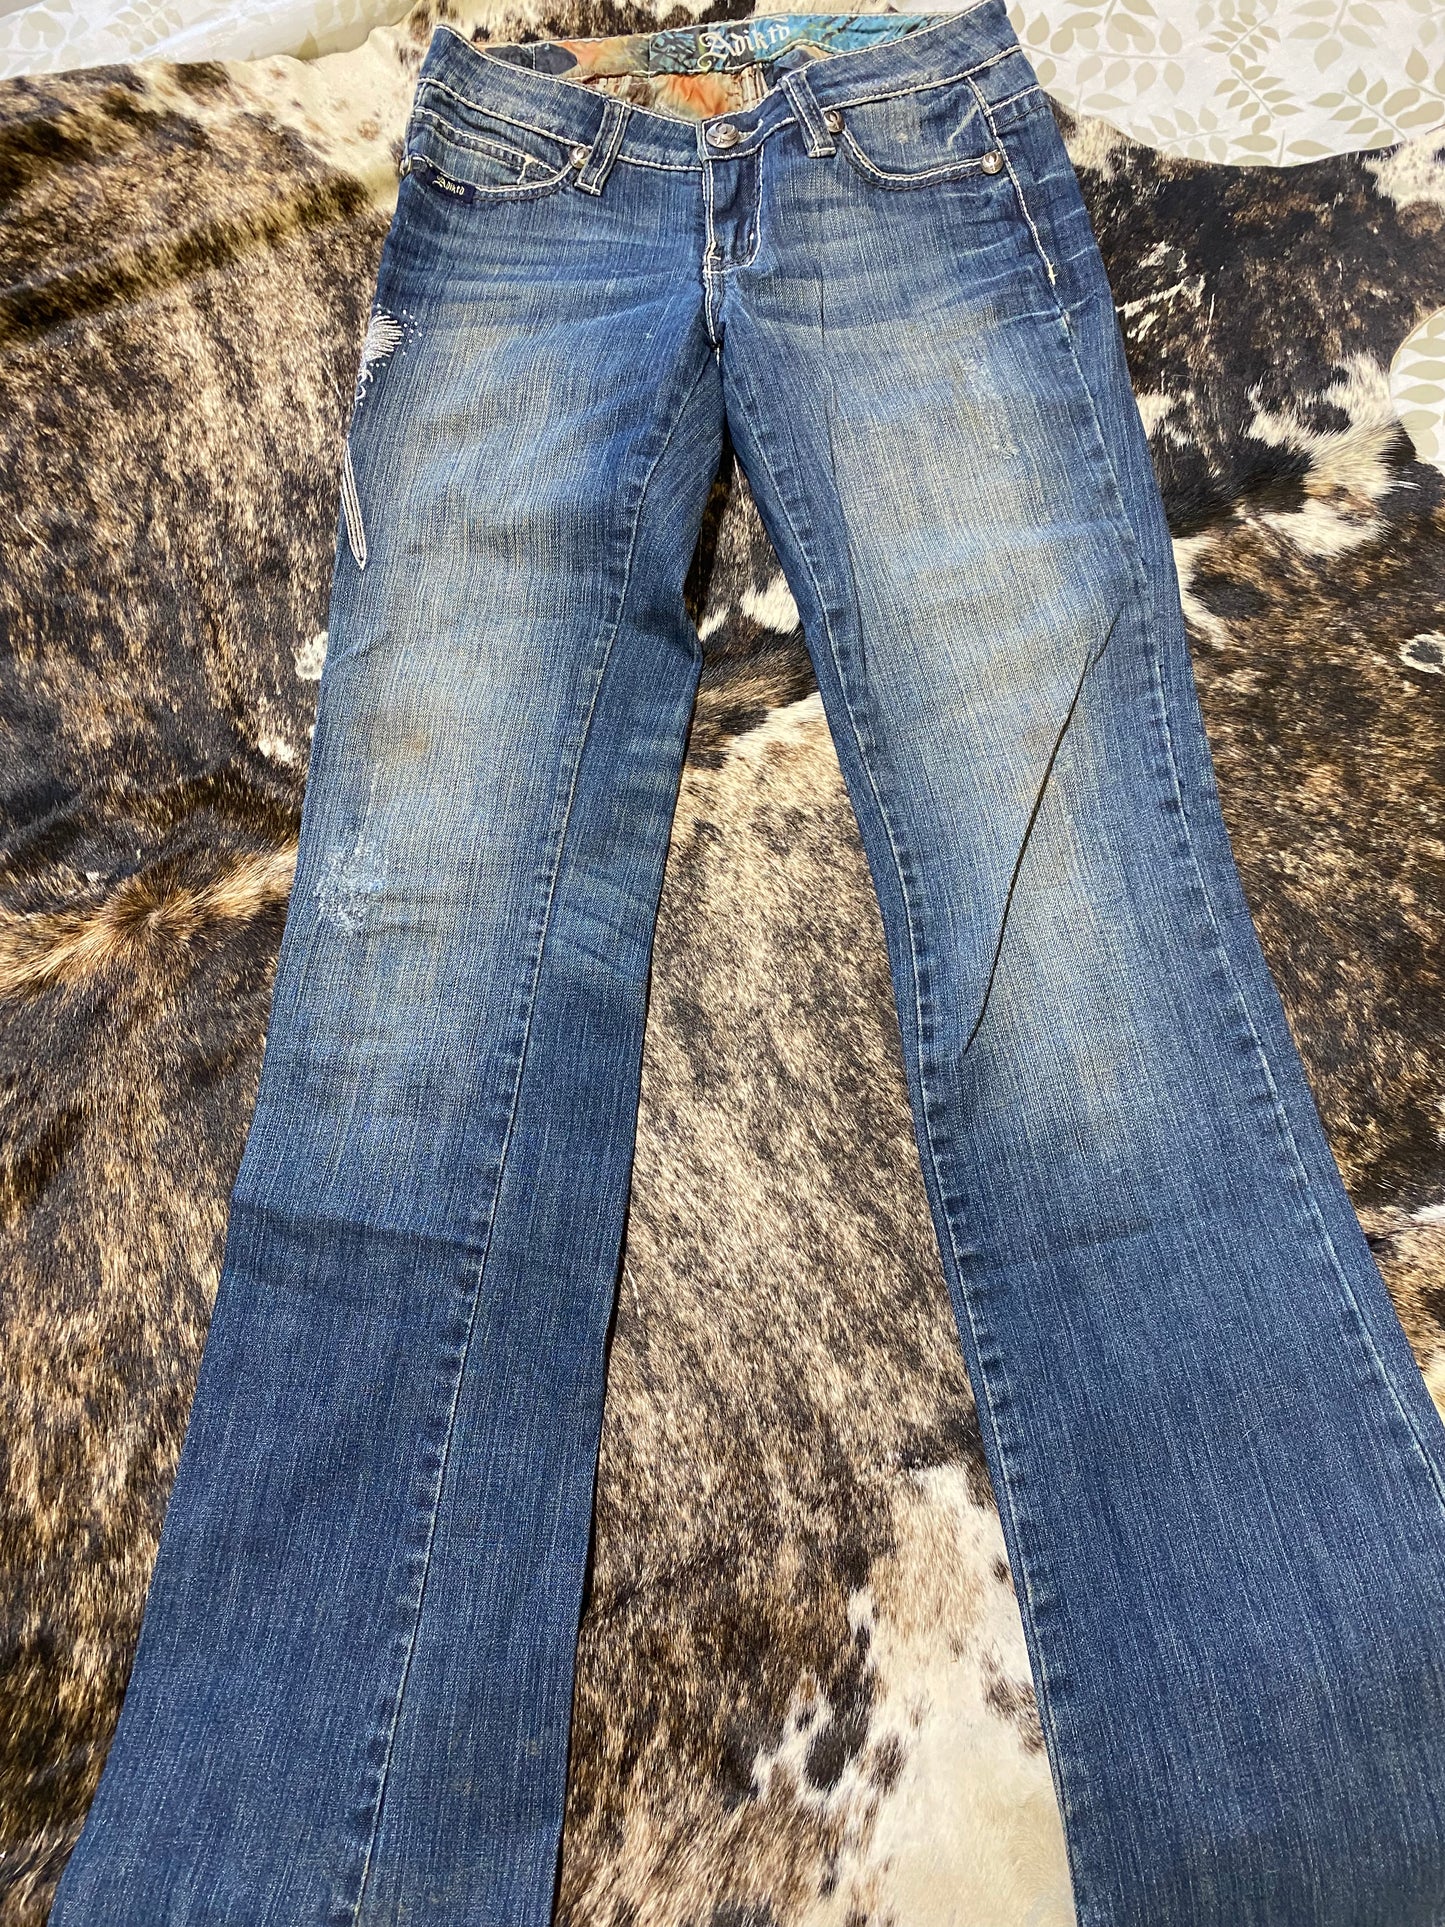 Adikto Bling Consignment JEans